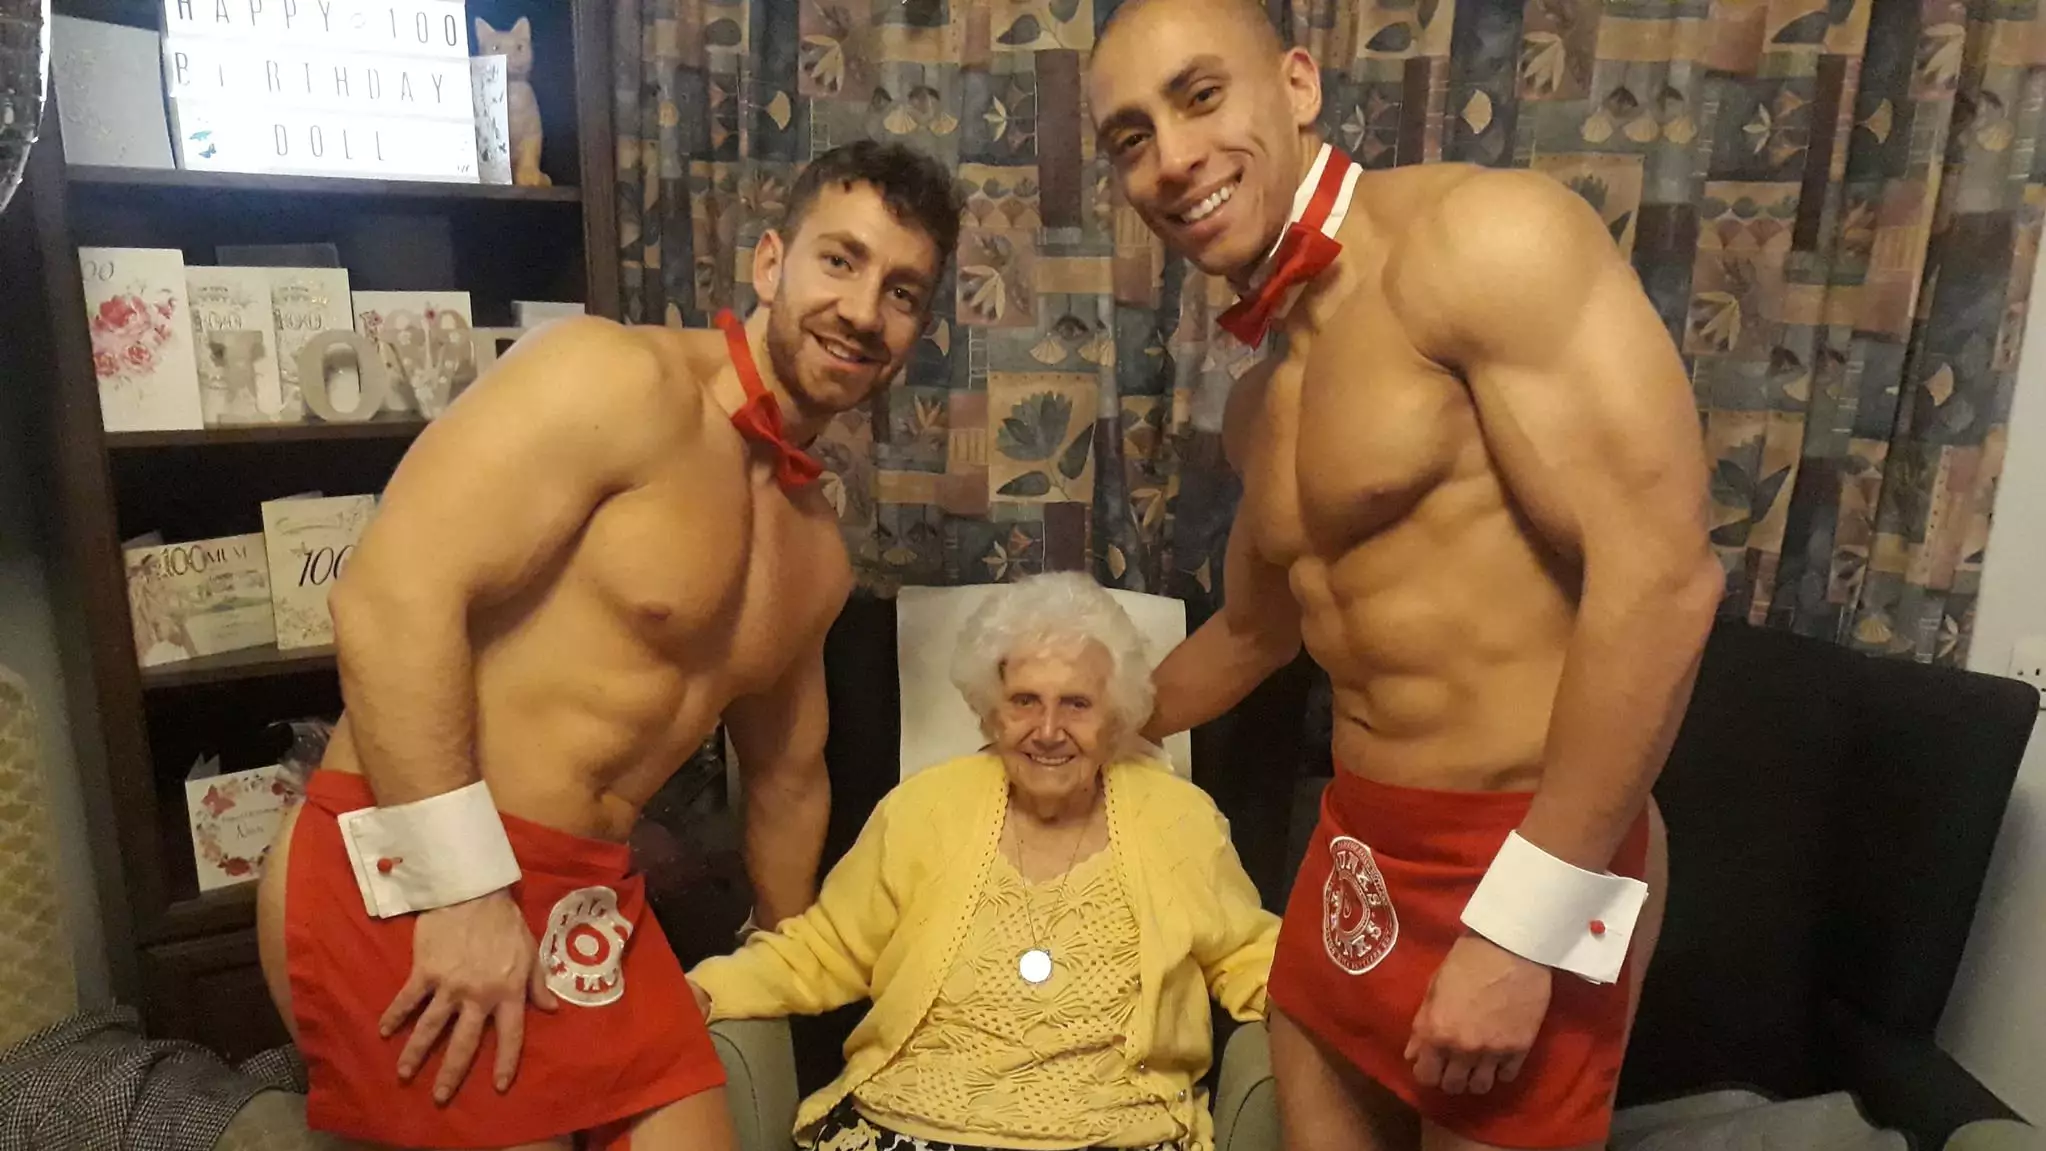 Great Grandmother Celebrates 100th Birthday With Hunks In Trunks